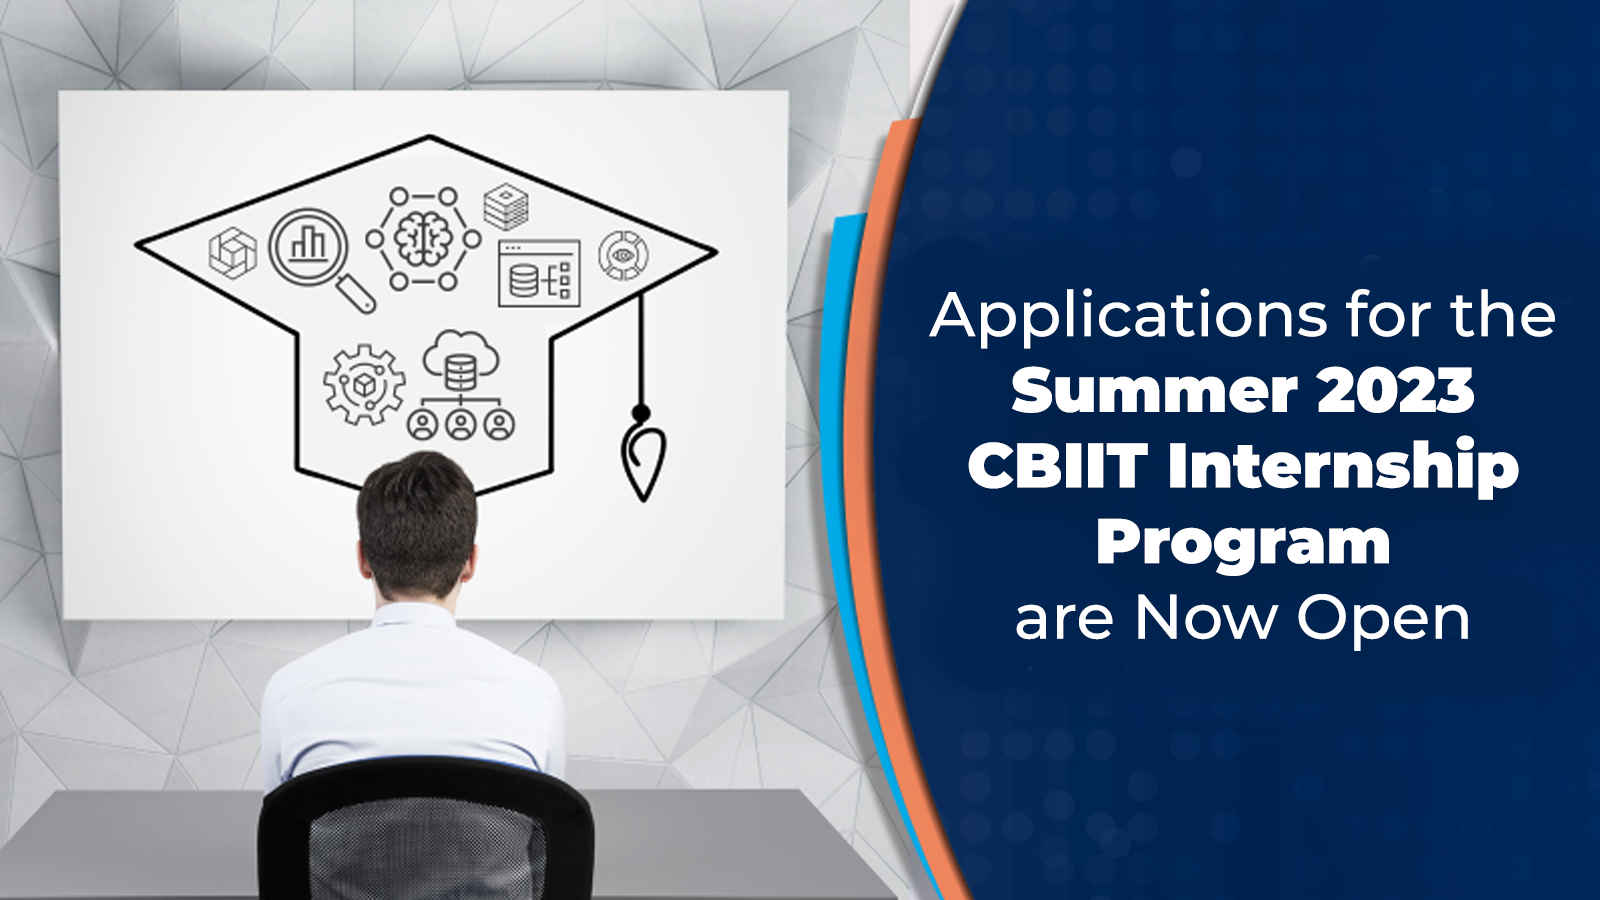 Data science education imagery with text that reads, "Applications for the Summer 2023 CBIIT Internship Program are Now Open"